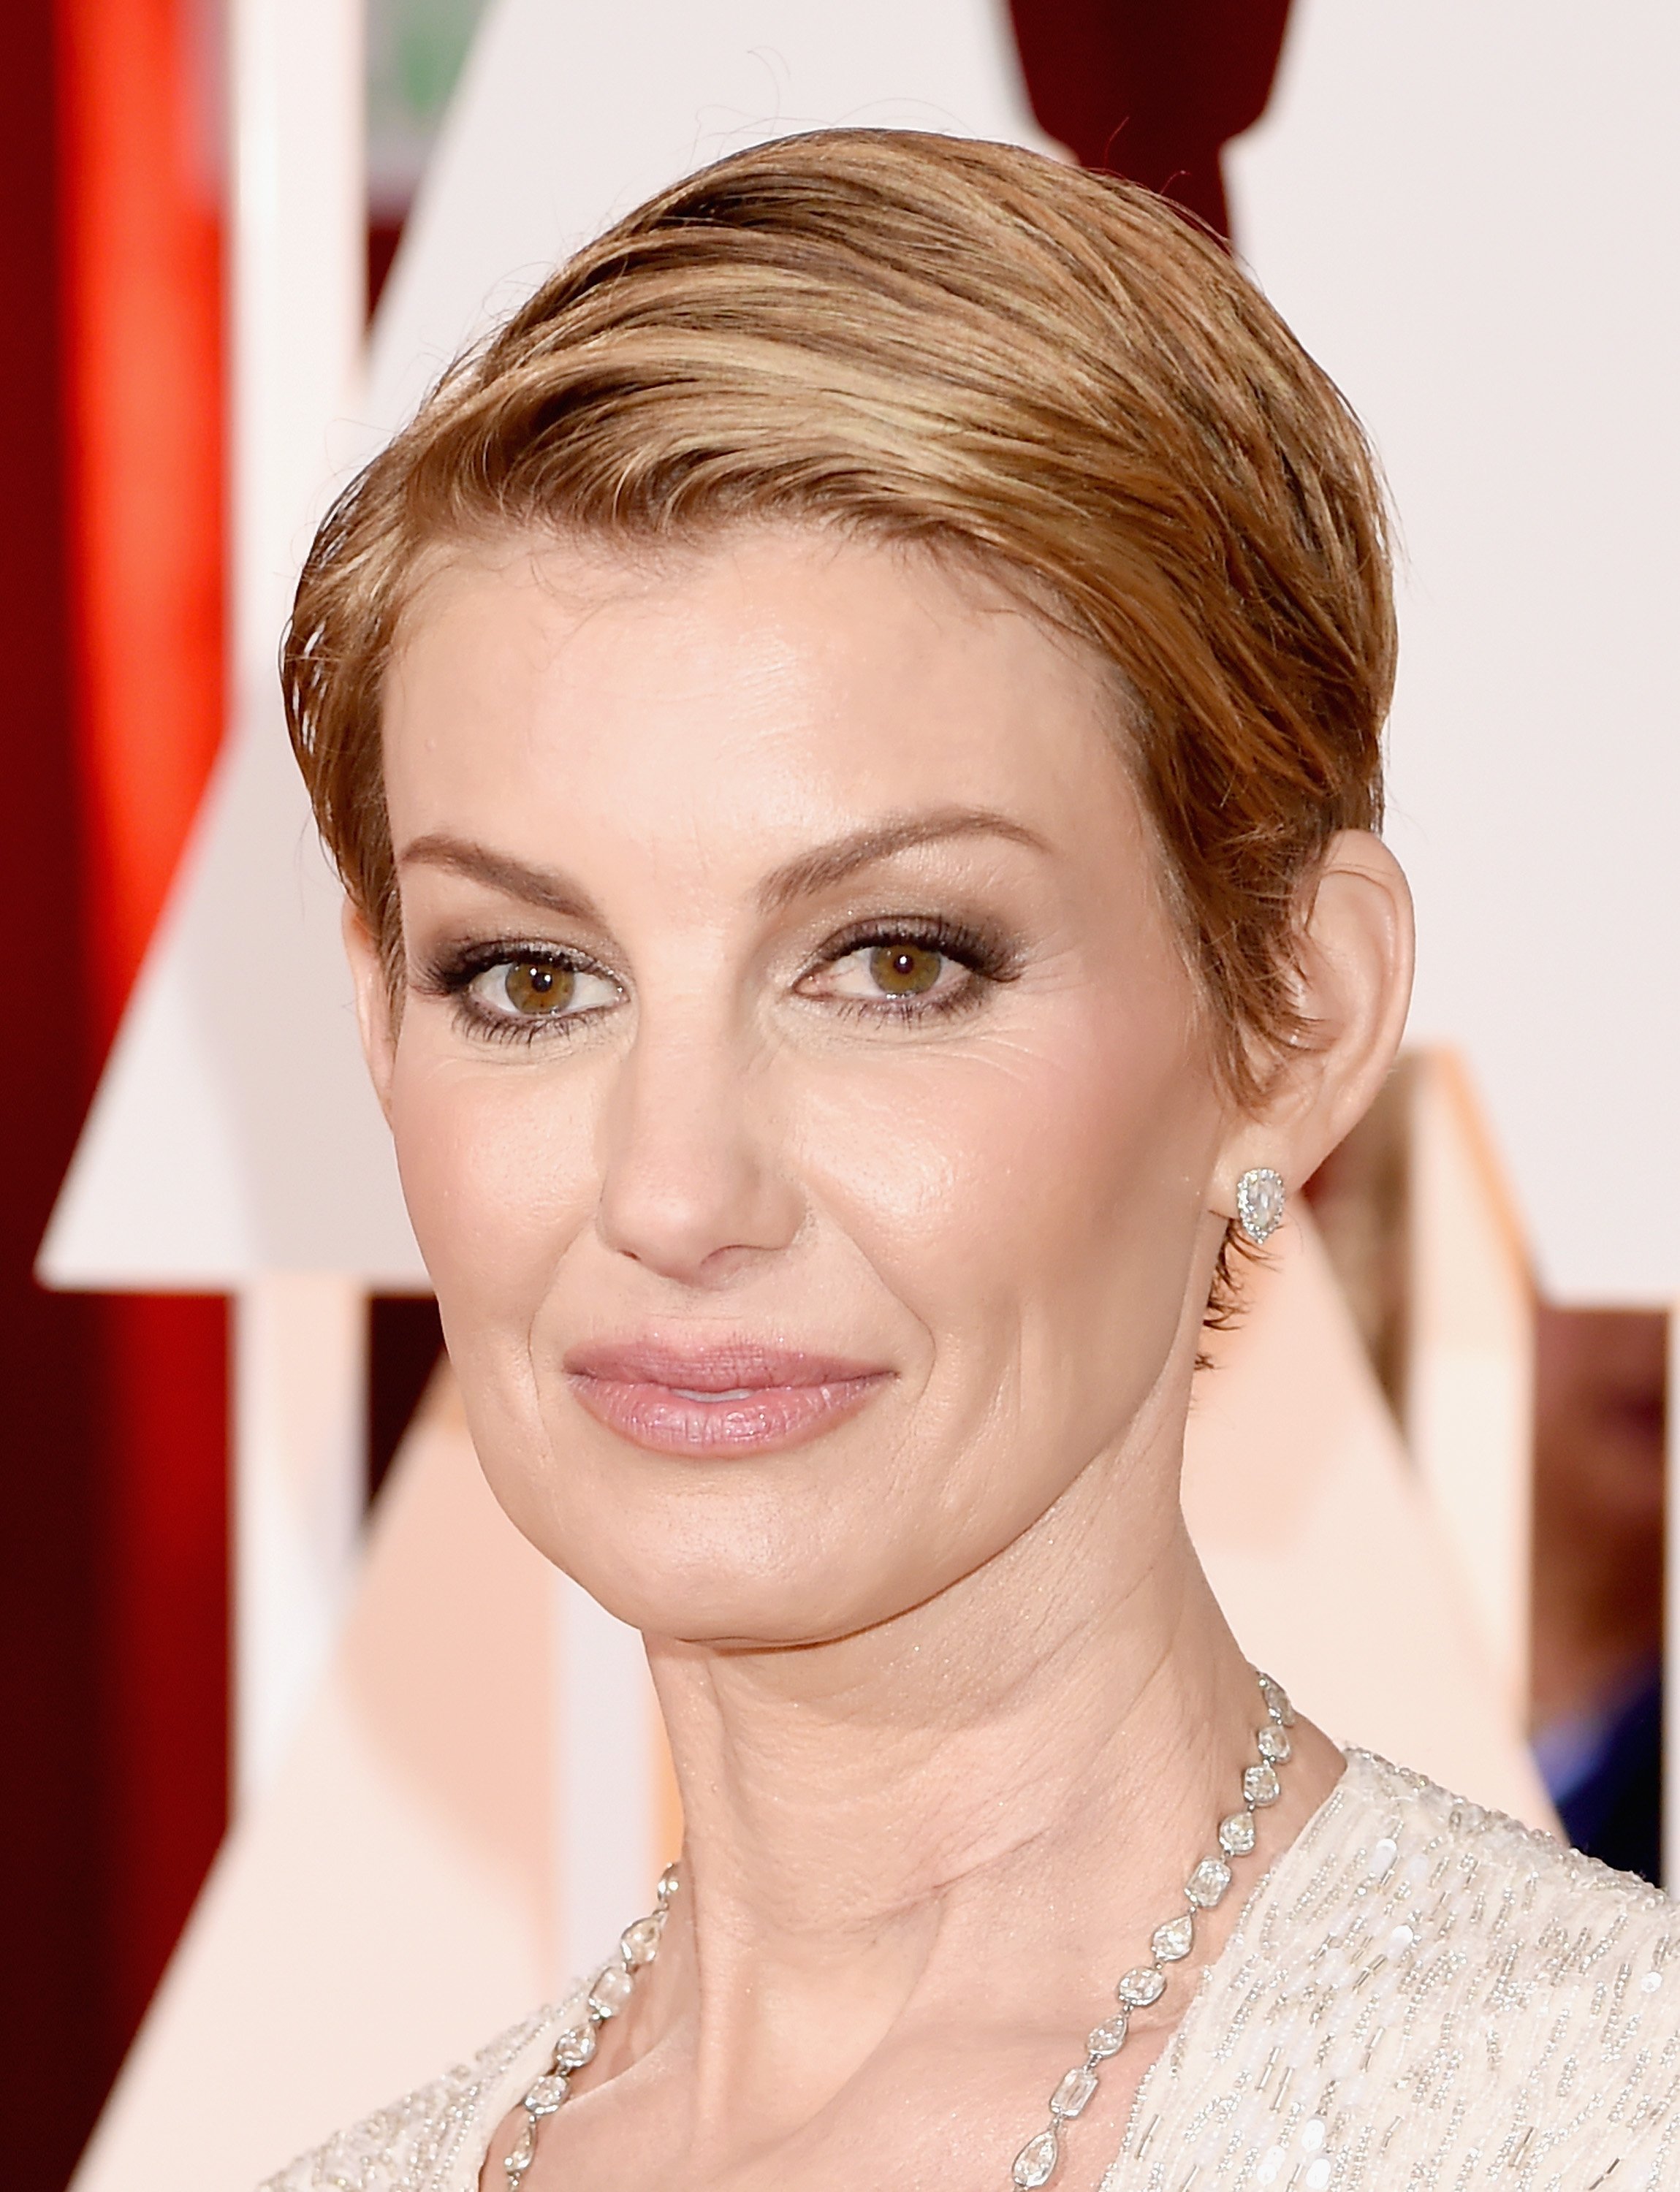 Singer Faith Hill attends the 87th Annual Academy Awards at Hollywood & Highland Center on February 22, 2015 in Hollywood, California | Source: Getty Images